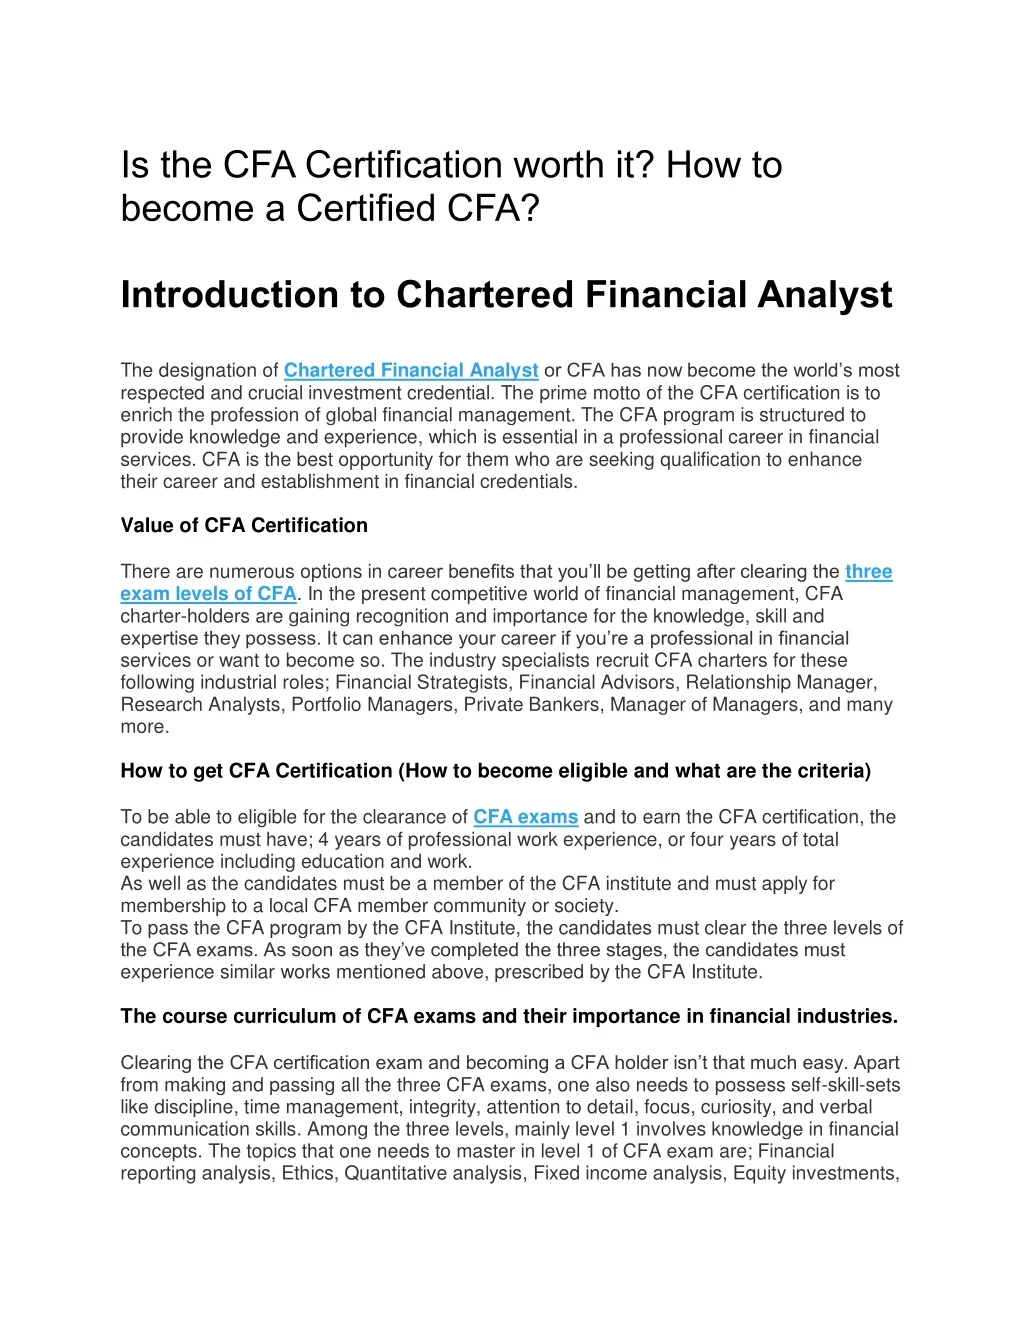 is the cfa certification worth it how to become